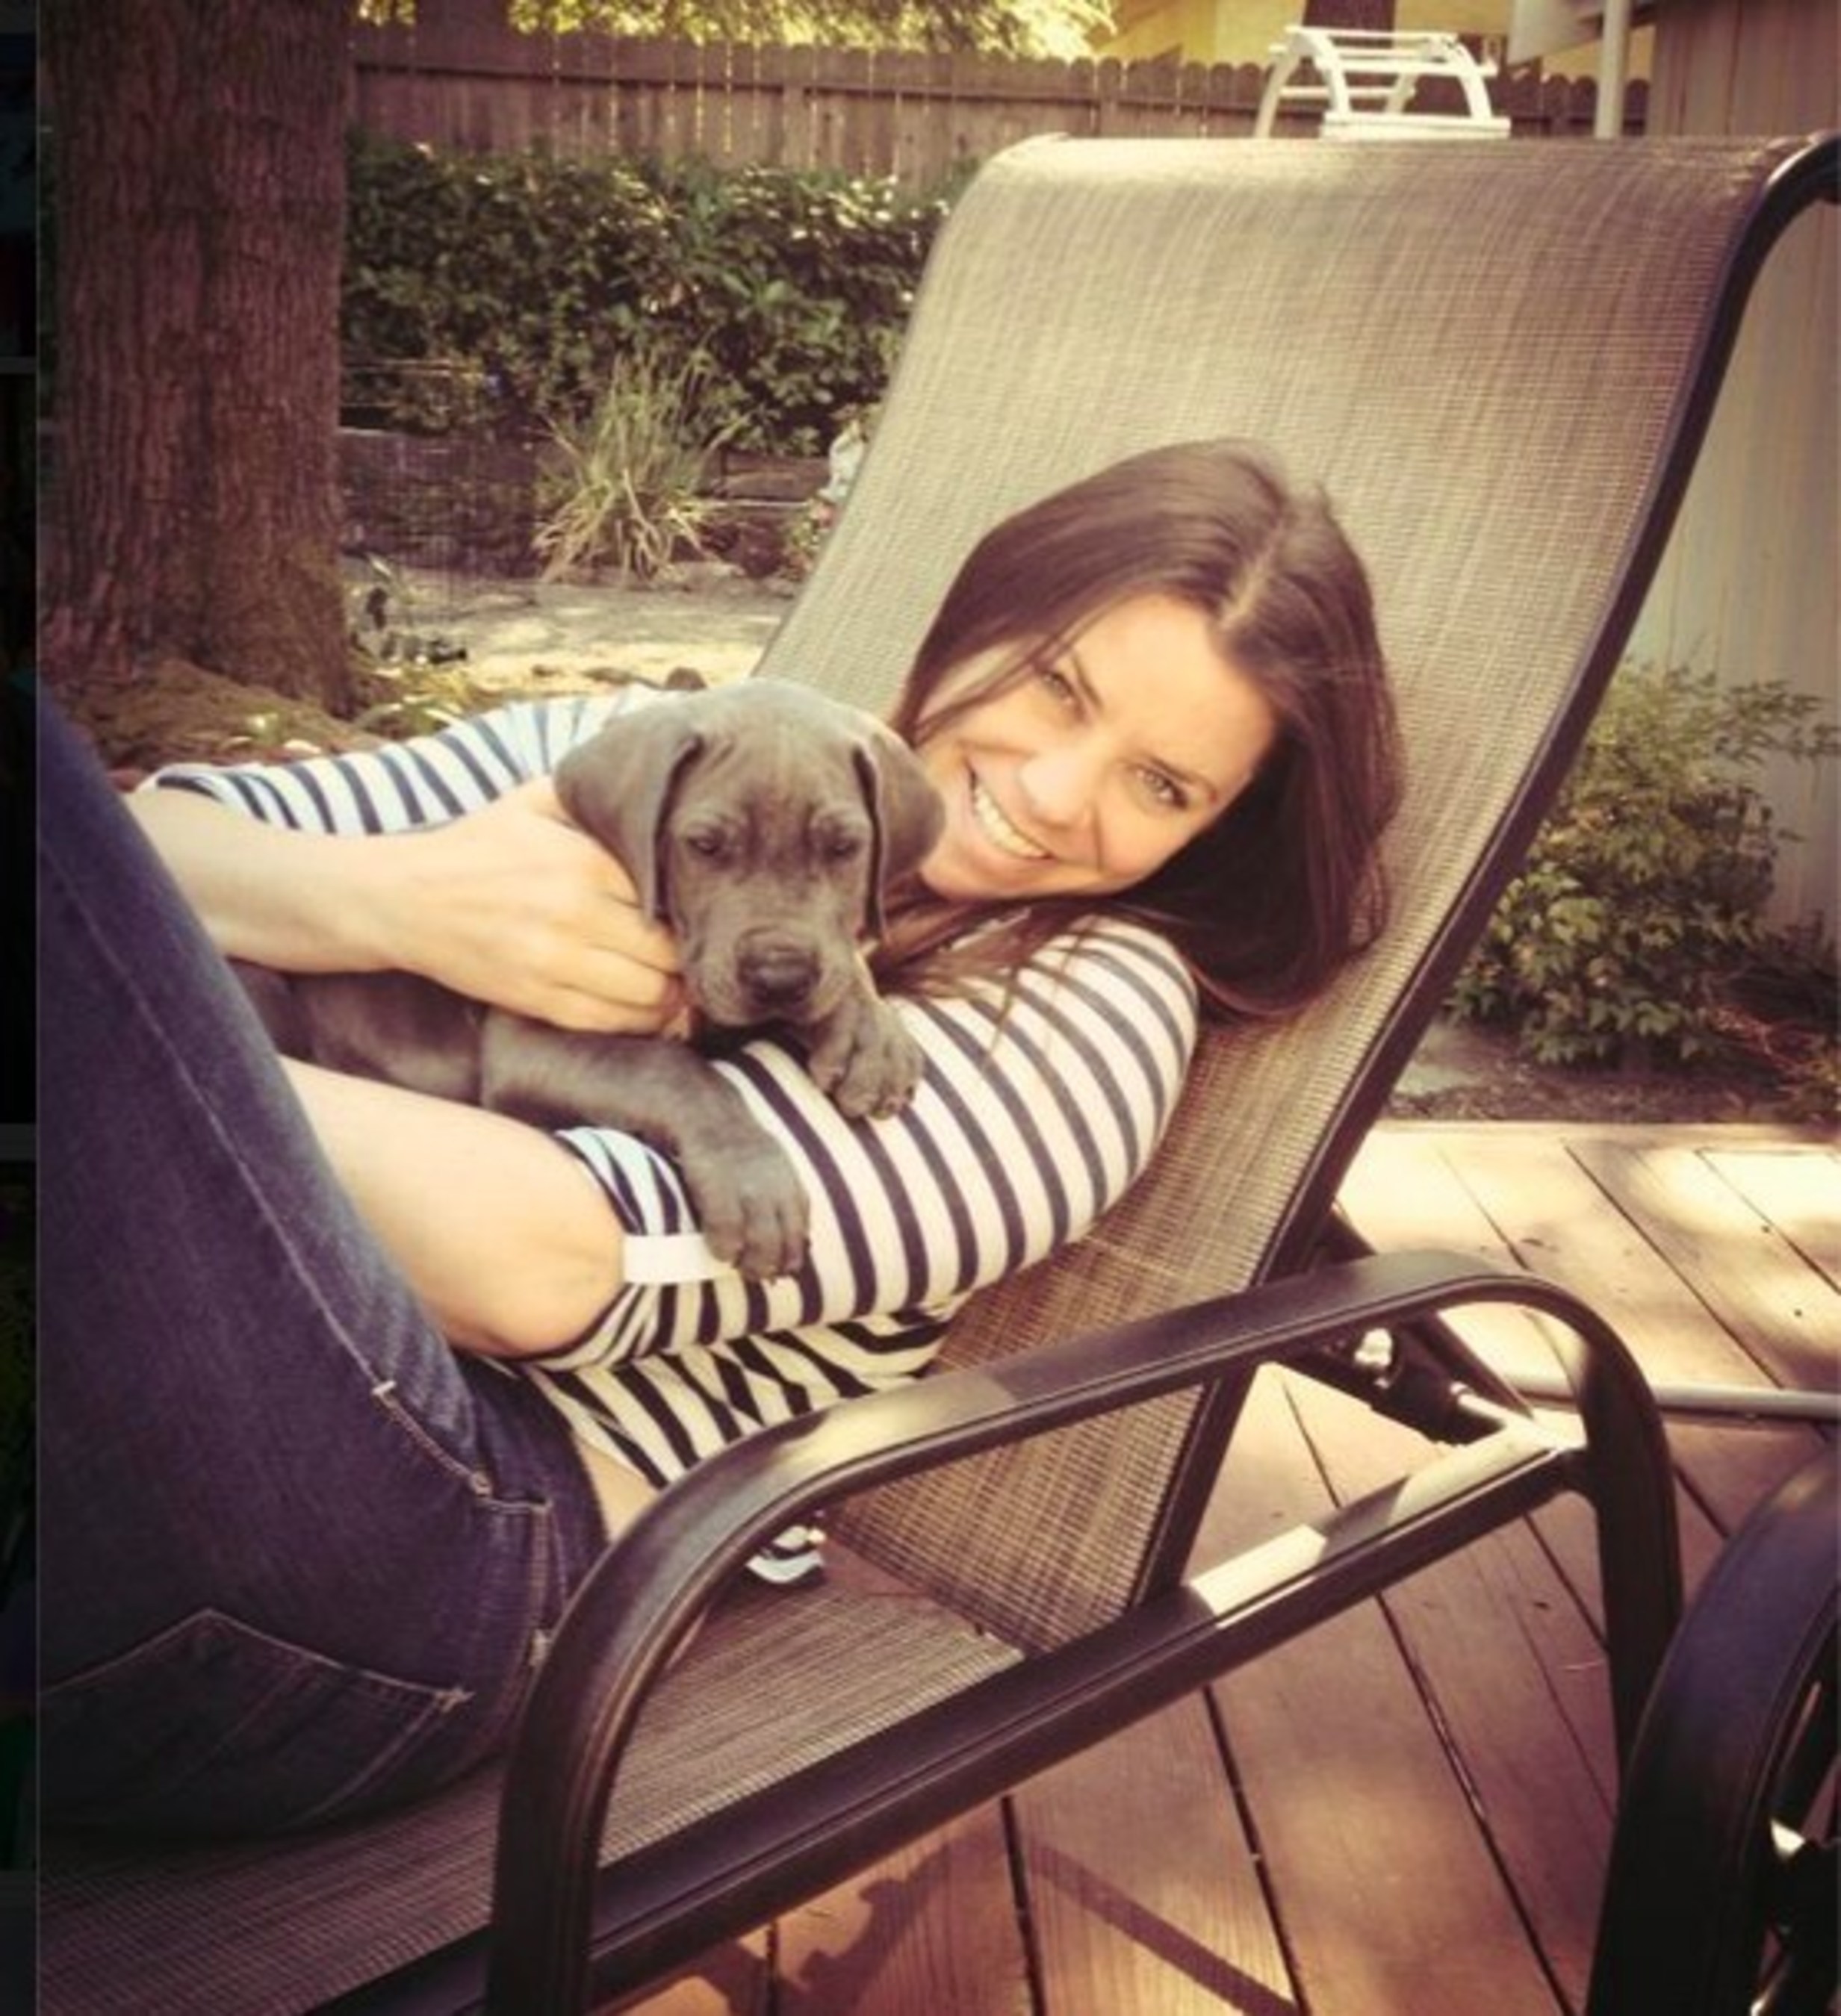 Brittany Maynard, Terminal cancer patient/Death with Dignity advocate